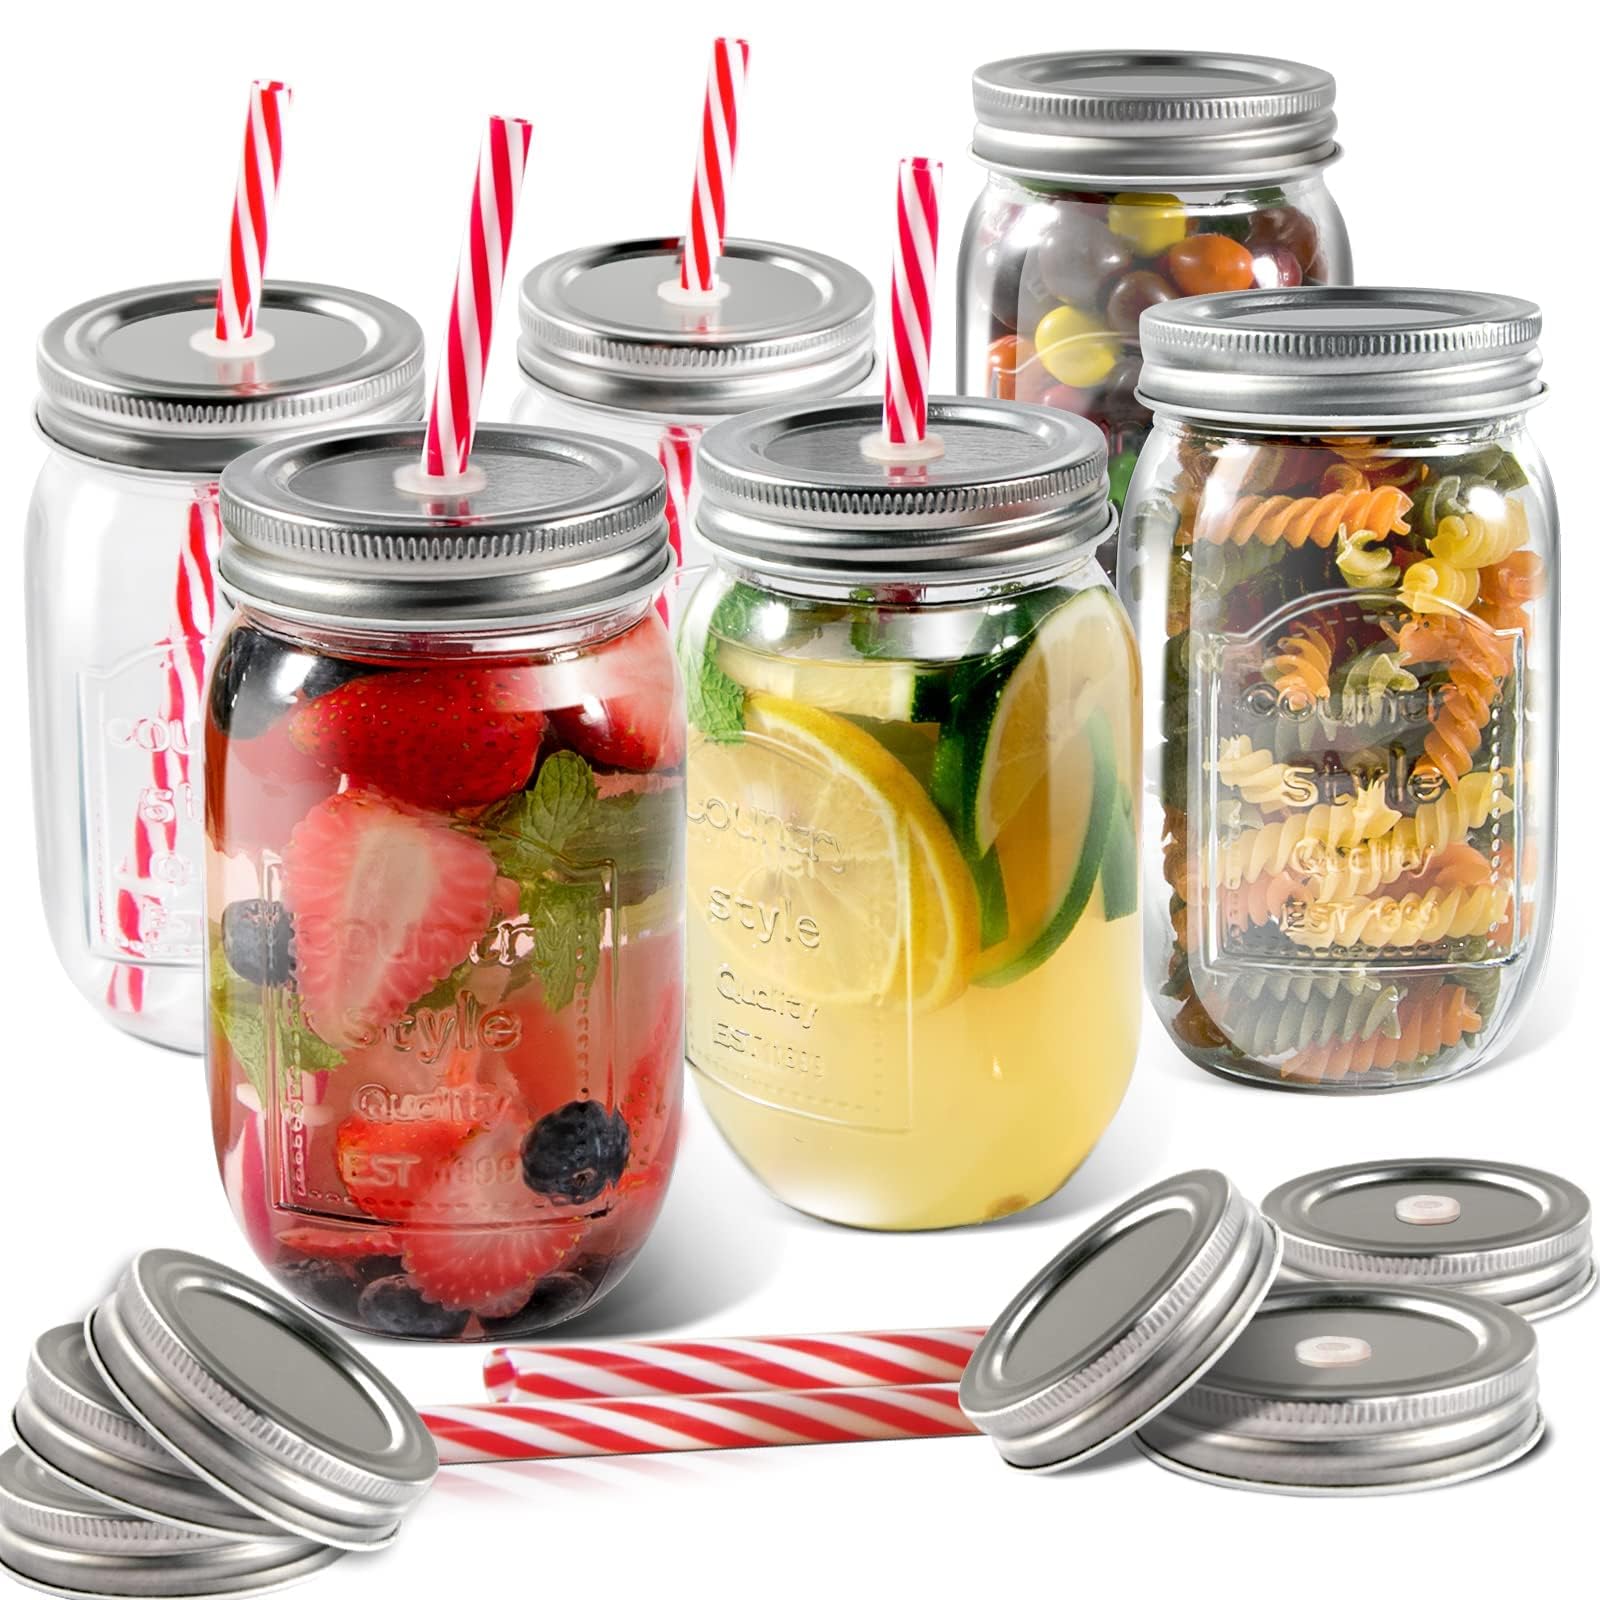 Masthome Regular Mouth Mason Jars 16oz, Drinking Glasses with 6 Extra Lids & 6 Reusable Straws, Glass Storage Jars for Canning, Preserving – Set of 6